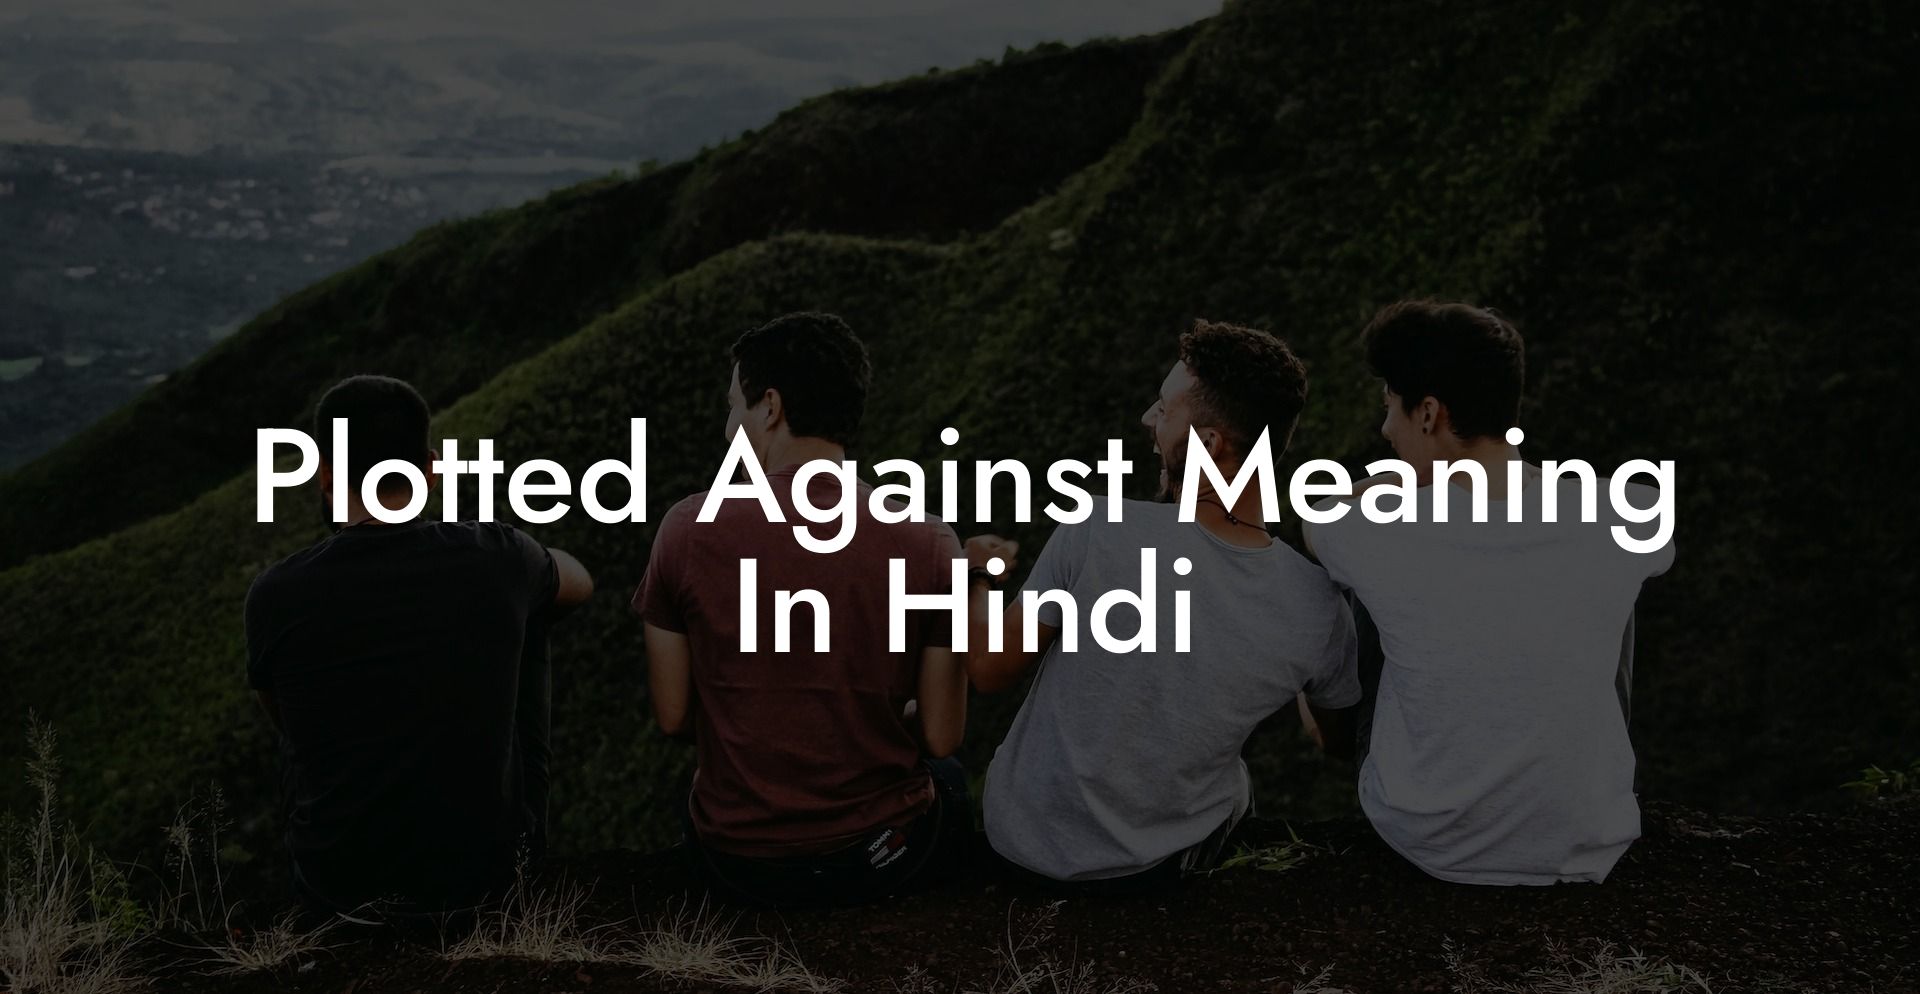 Plotted Against Meaning In Hindi